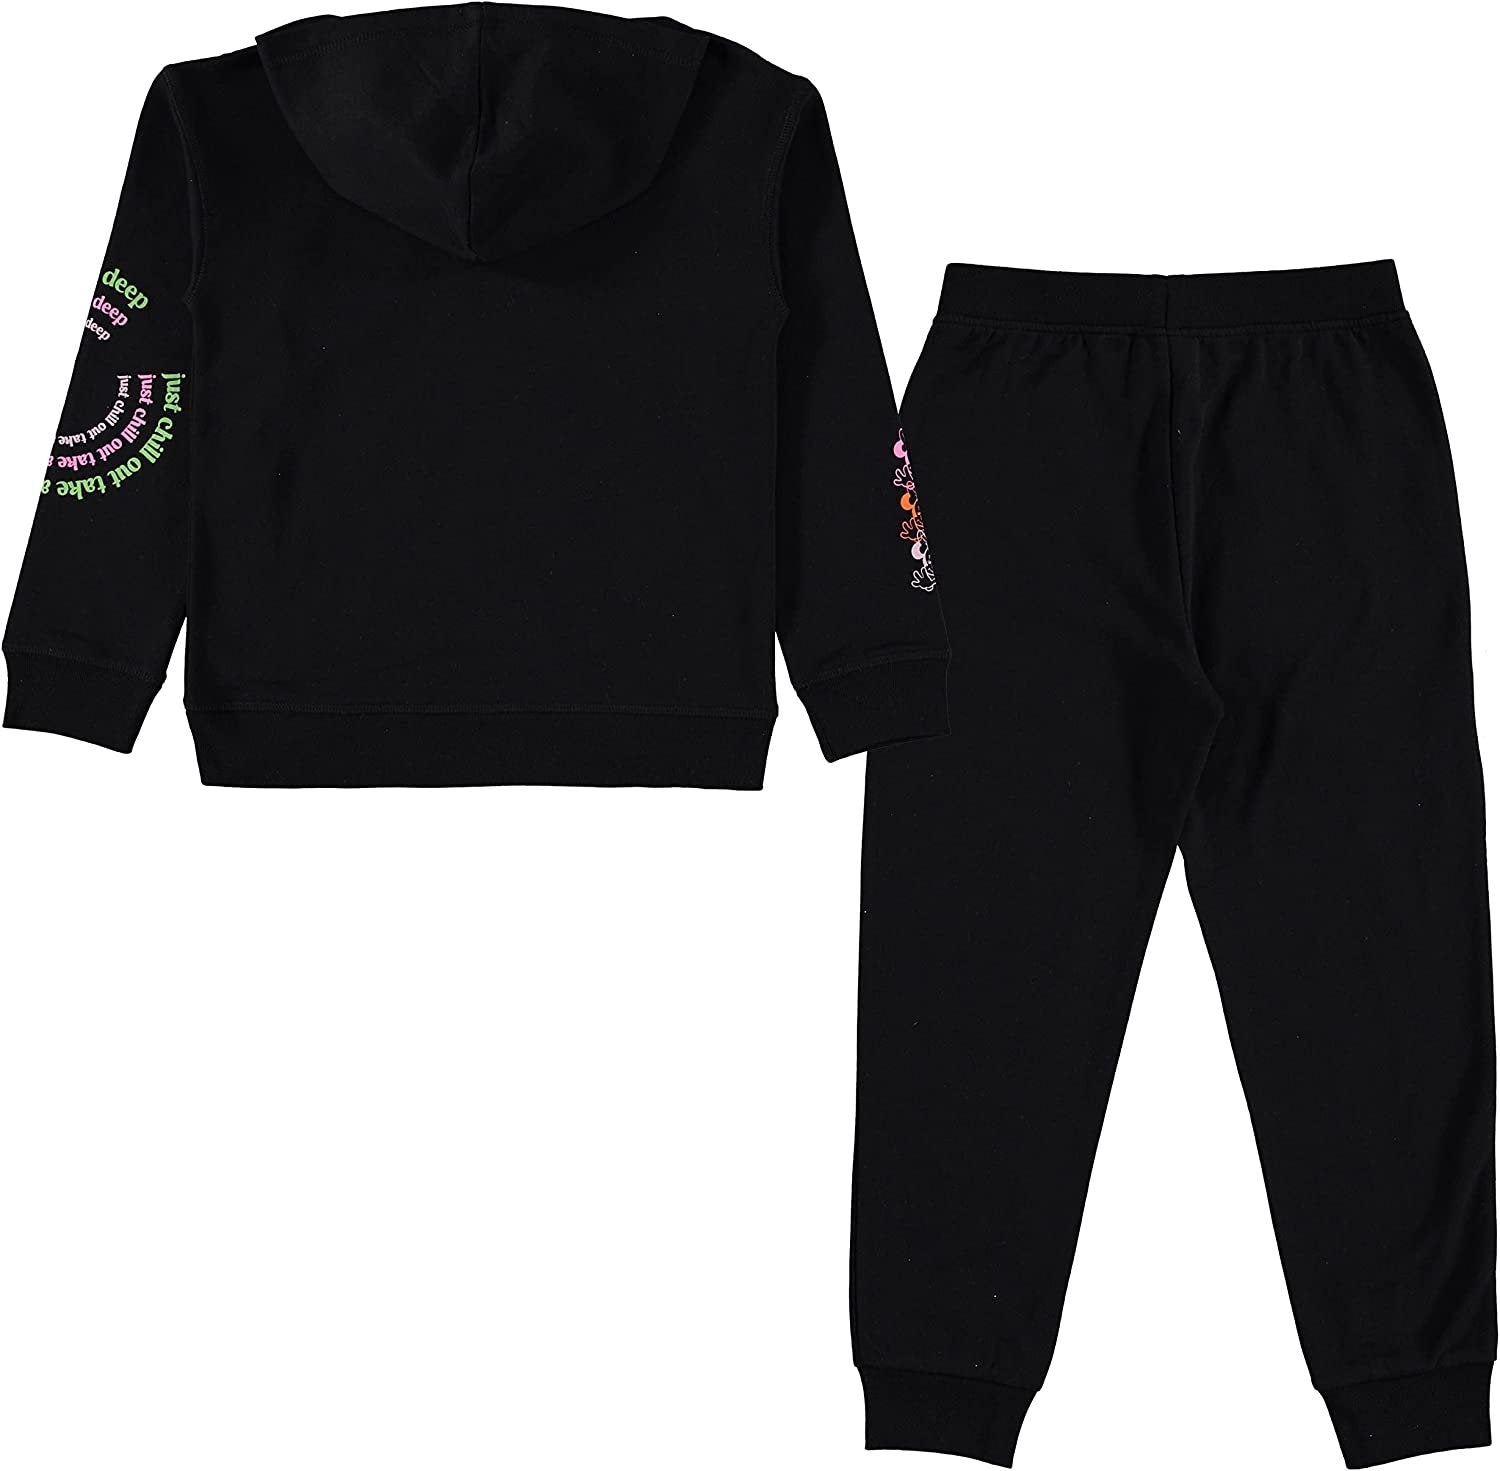 DISNEY Girls Lilo and Stitch Jogger Sweatpants with Minnie Mouse